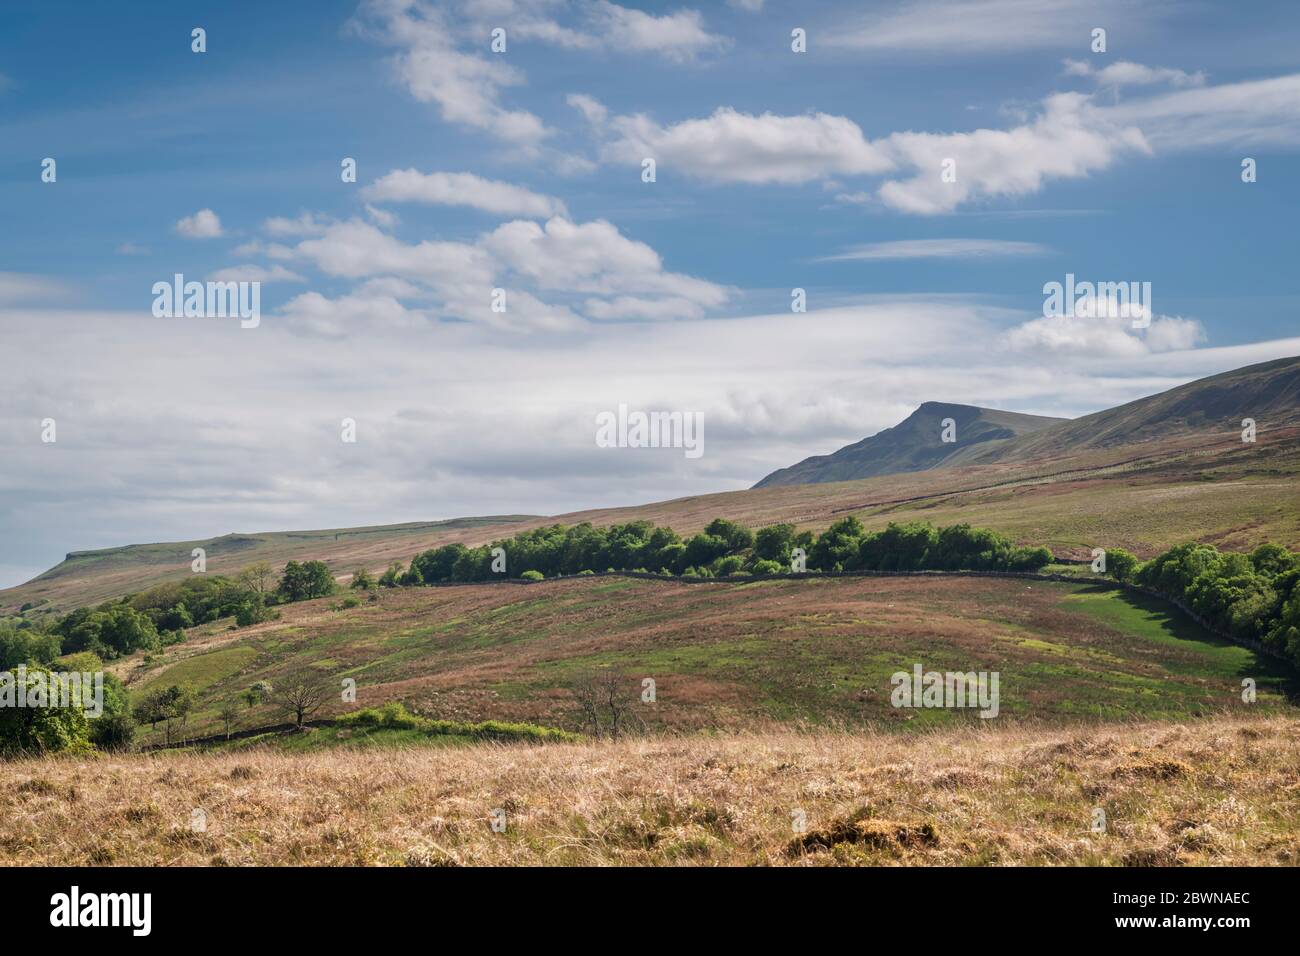 A summer three images HDR picture of Wild Boar Fell, in the Yorkshire Dales National Park, taken from Wharton Fell in Cumbria, England. 27 May 2020 Stock Photo